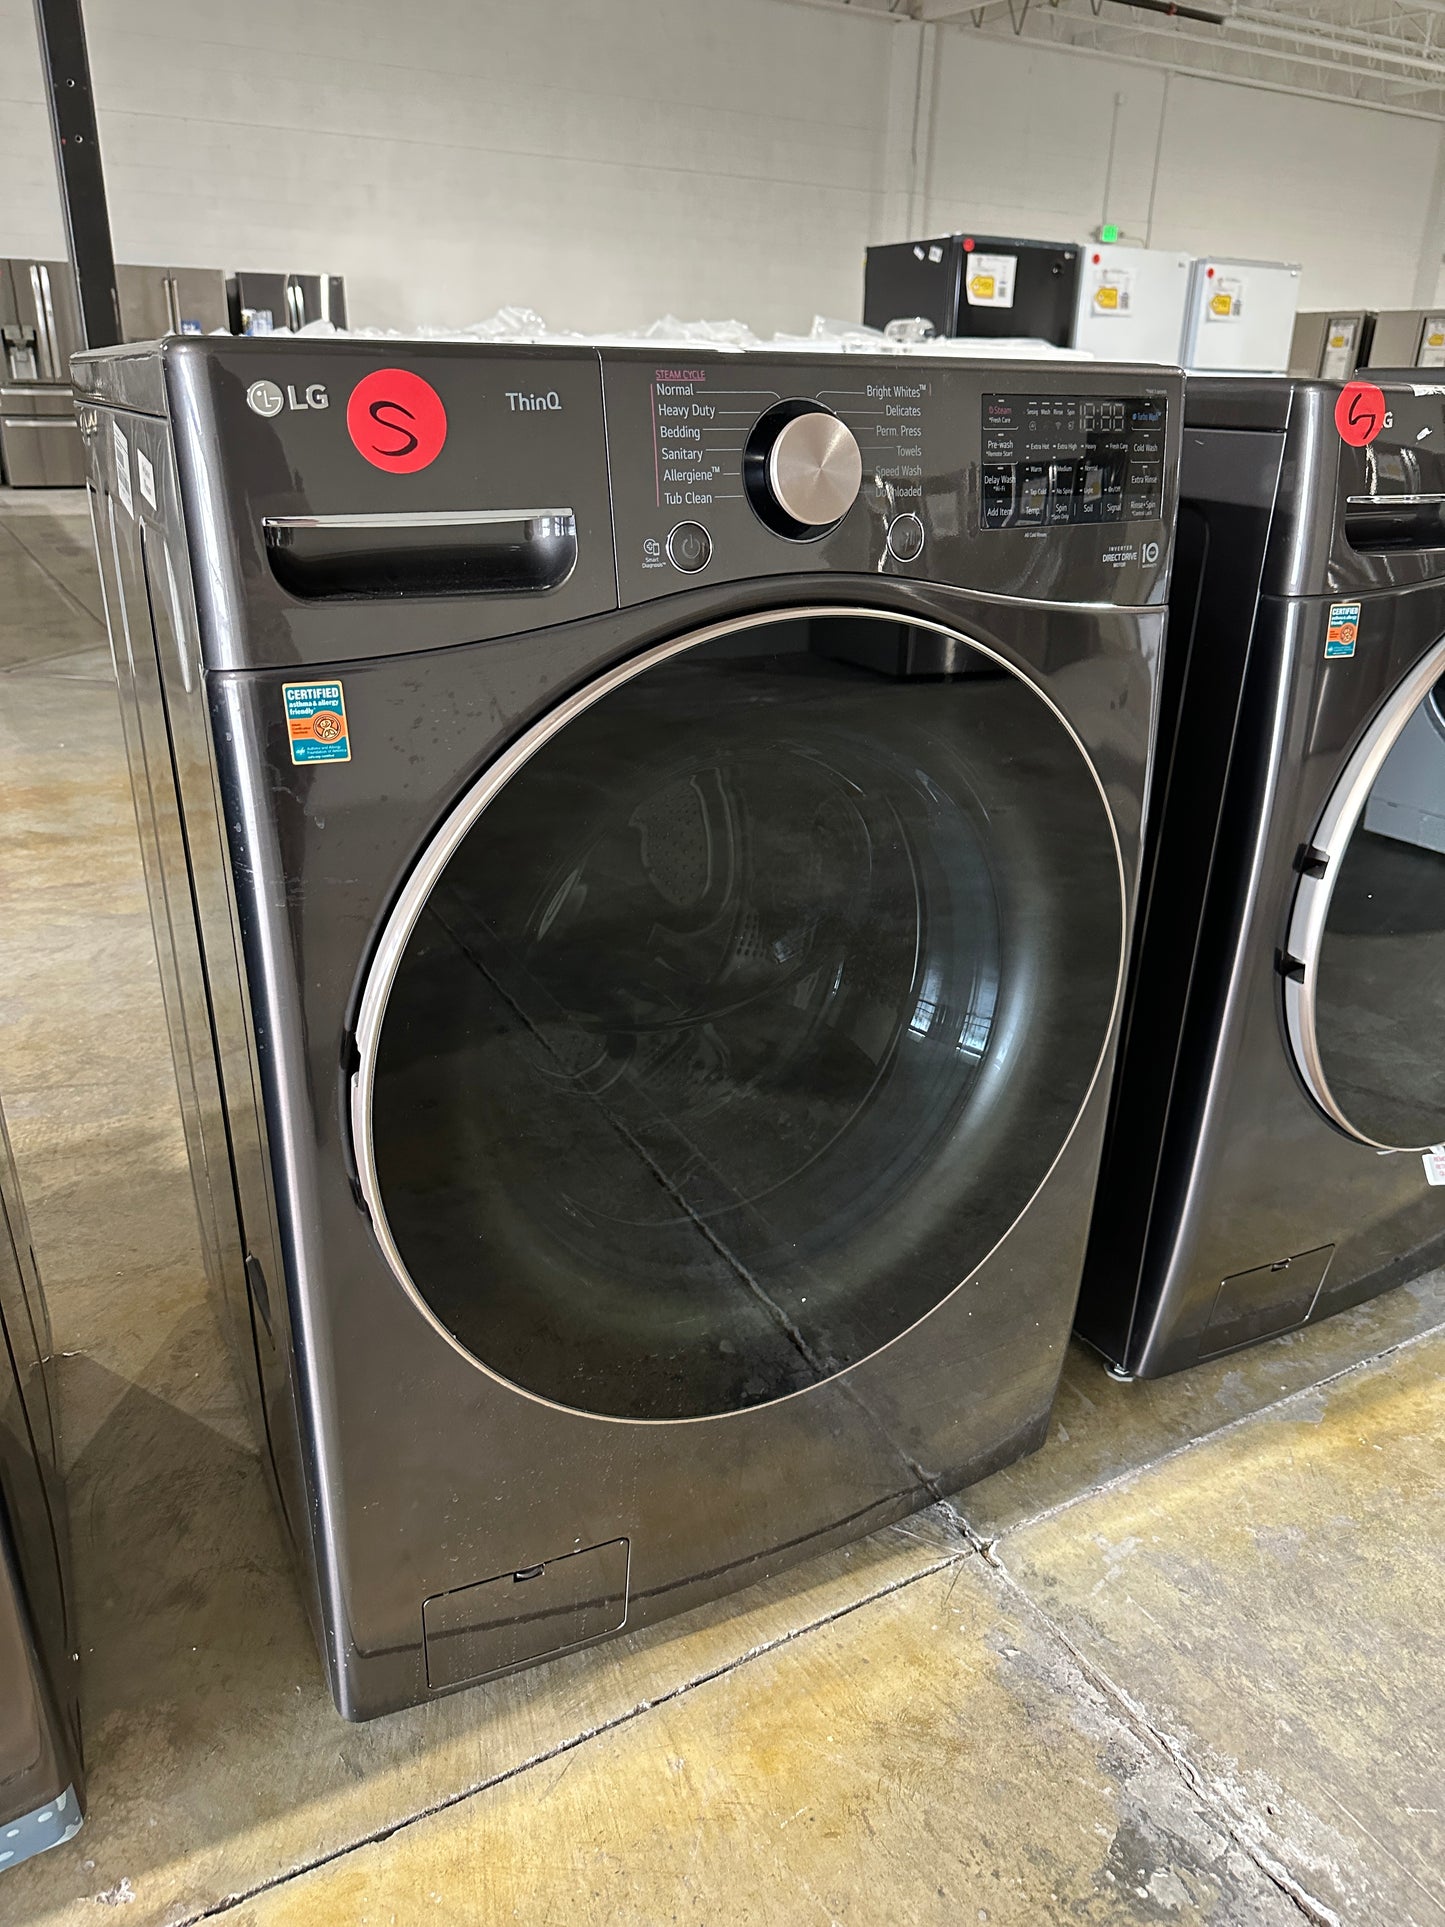 SMART FRONT LOAD WASHER WITH STEAM - WAS11879s Model:WM4000HBA